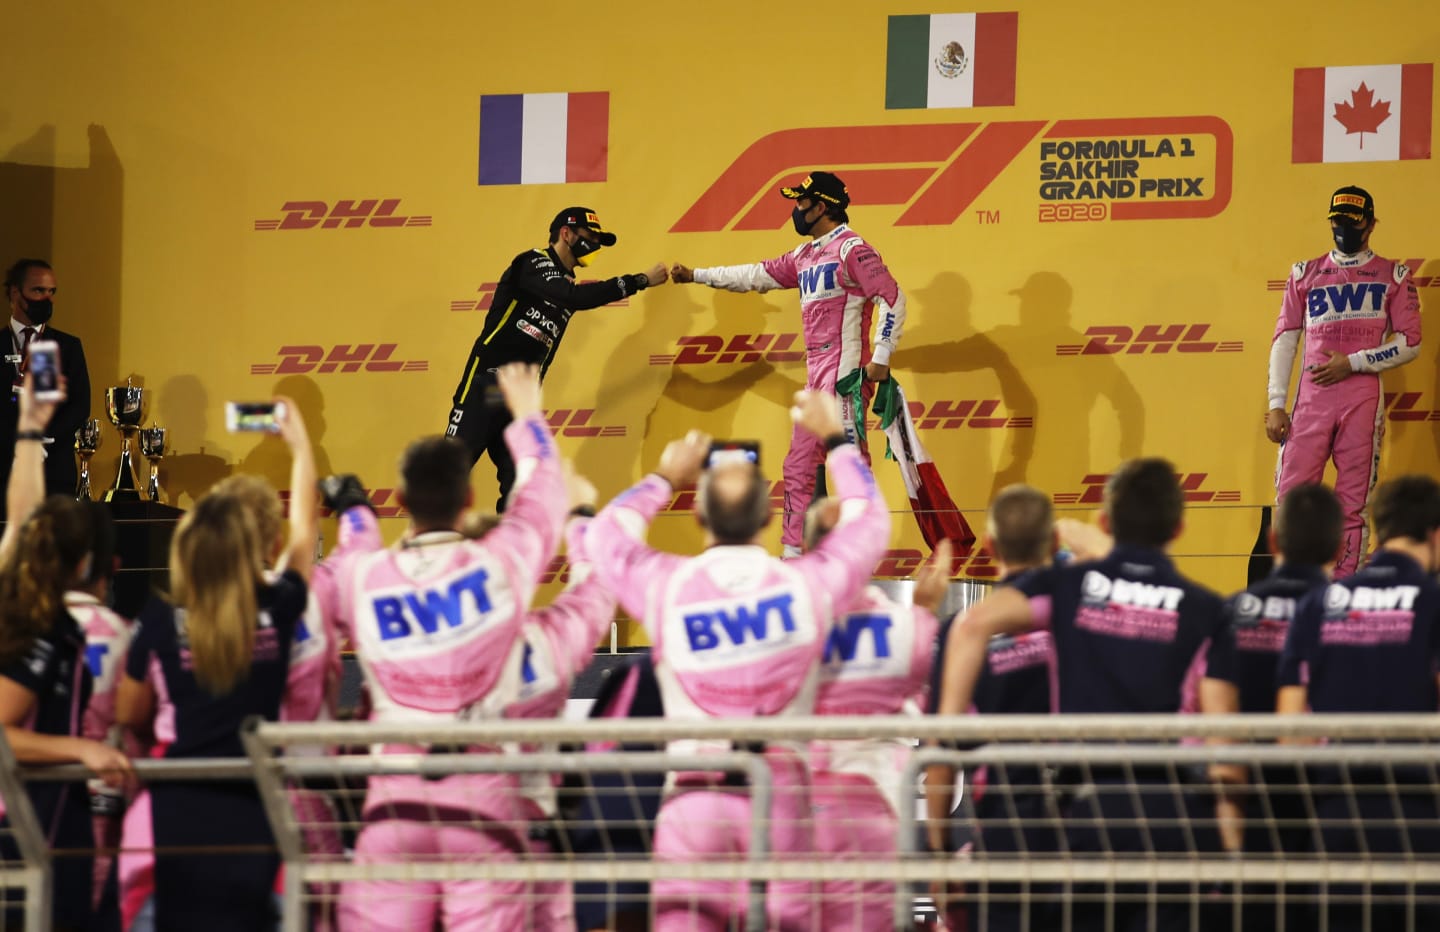 BAHRAIN, BAHRAIN - DECEMBER 06: Race winner Sergio Perez of Mexico and Racing Point and second placed Esteban Ocon of France and Renault Sport F1 celebrate on the podium during the F1 Grand Prix of Sakhir at Bahrain International Circuit on December 06, 2020 in Bahrain, Bahrain. (Photo by Hamad I Mohammed - Pool/Getty Images)